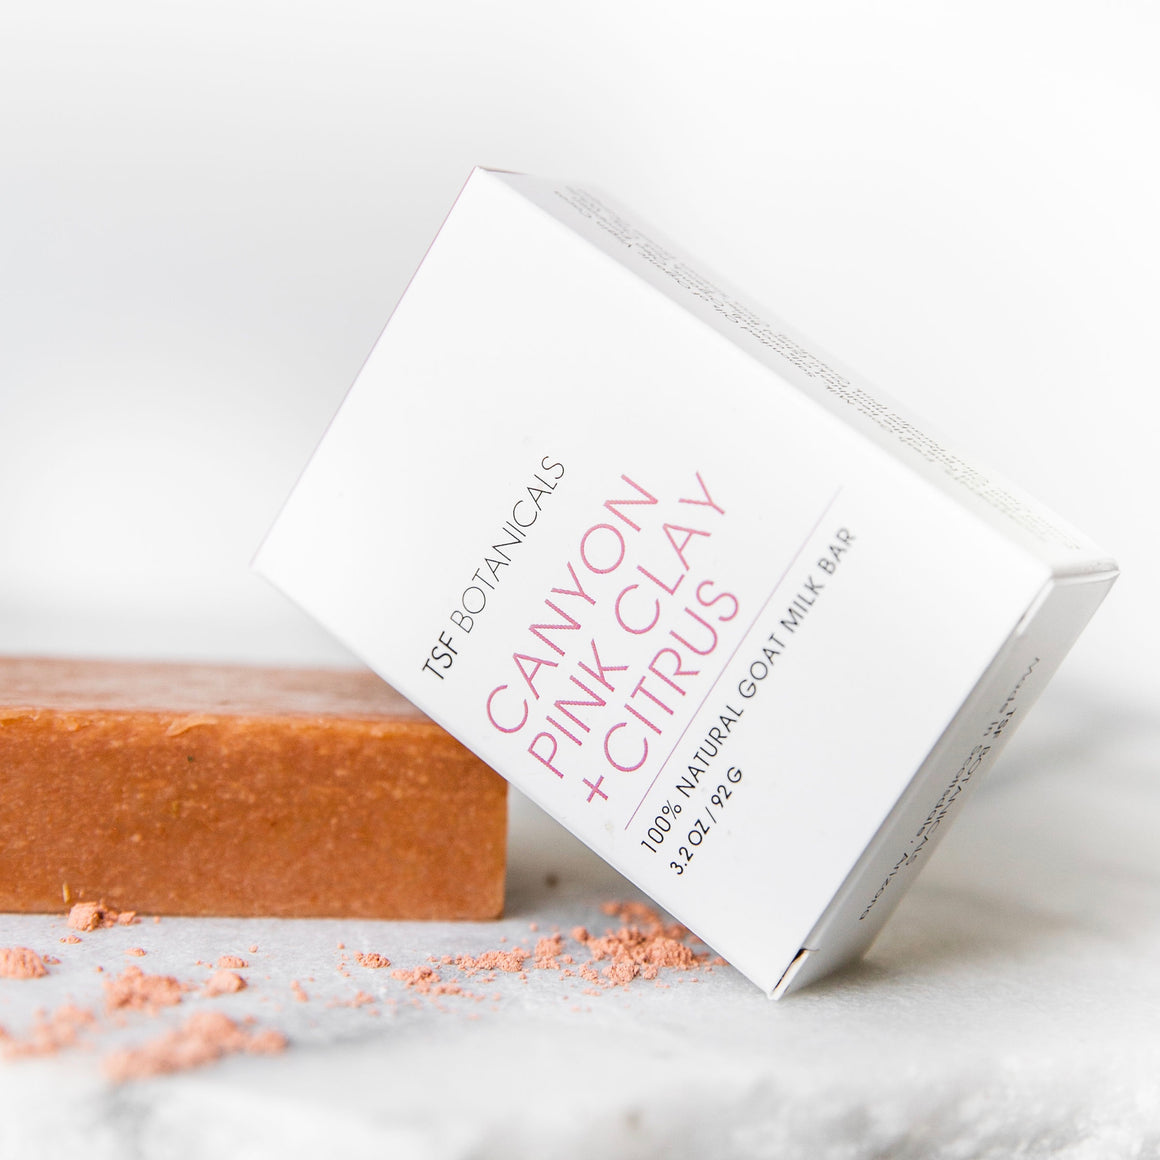 CANYON PINK CLAY + GRAPEFRUIT. 💗   Mature/Dry + Normal Skin || GOAT MILK FACE CLEANSING BAR || Olive Oil + Shea Butter